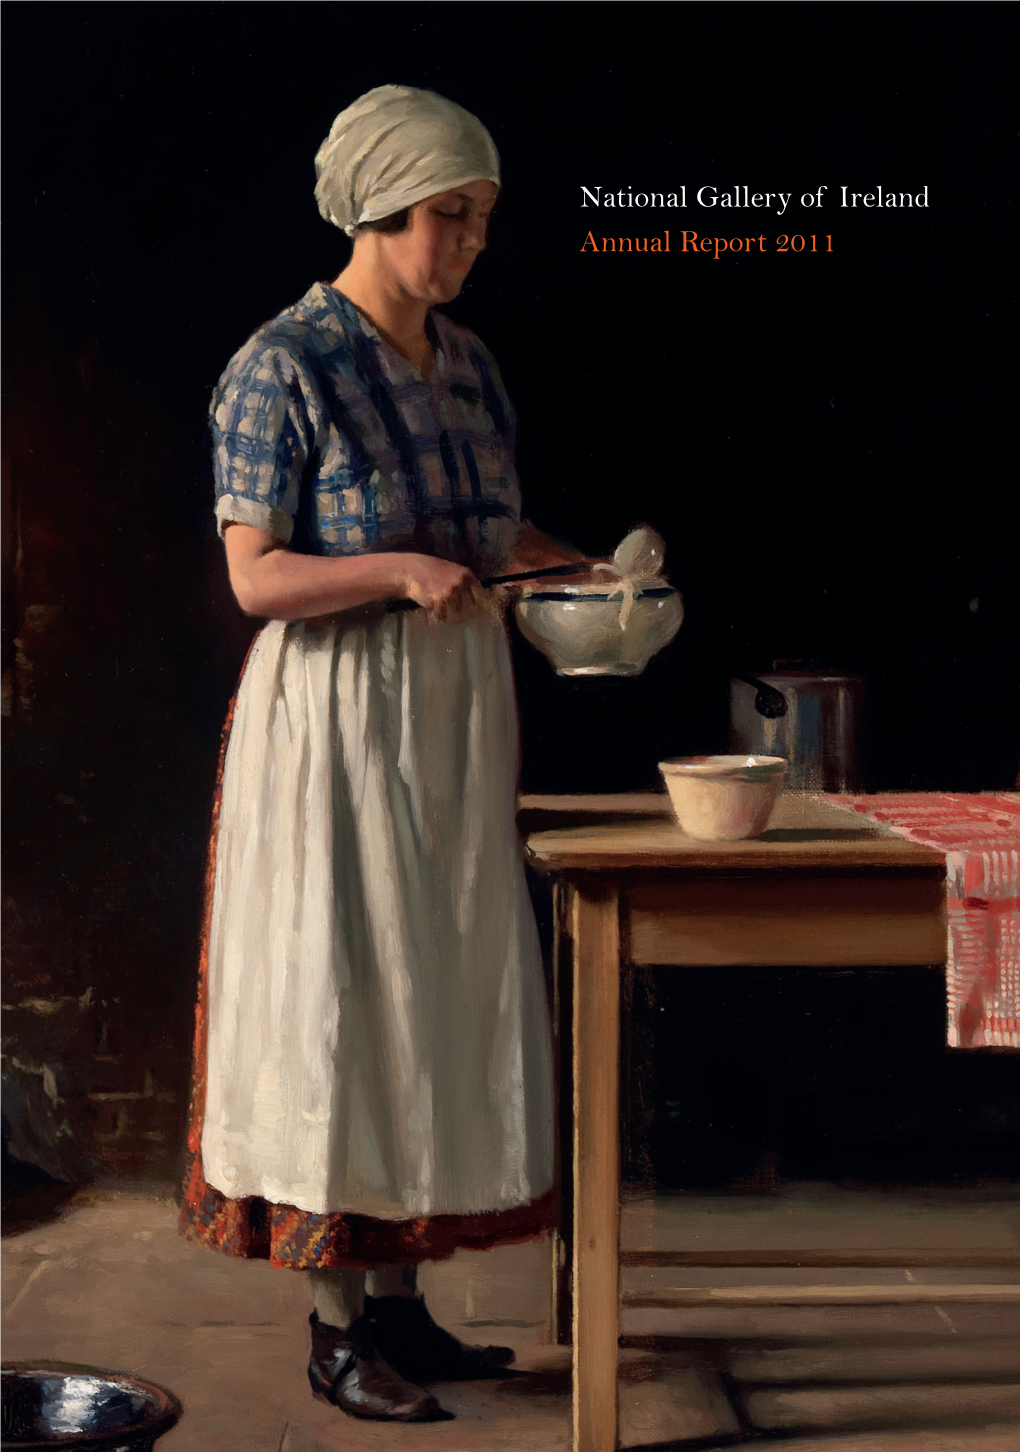 National Gallery of Ireland Annual Report 2011